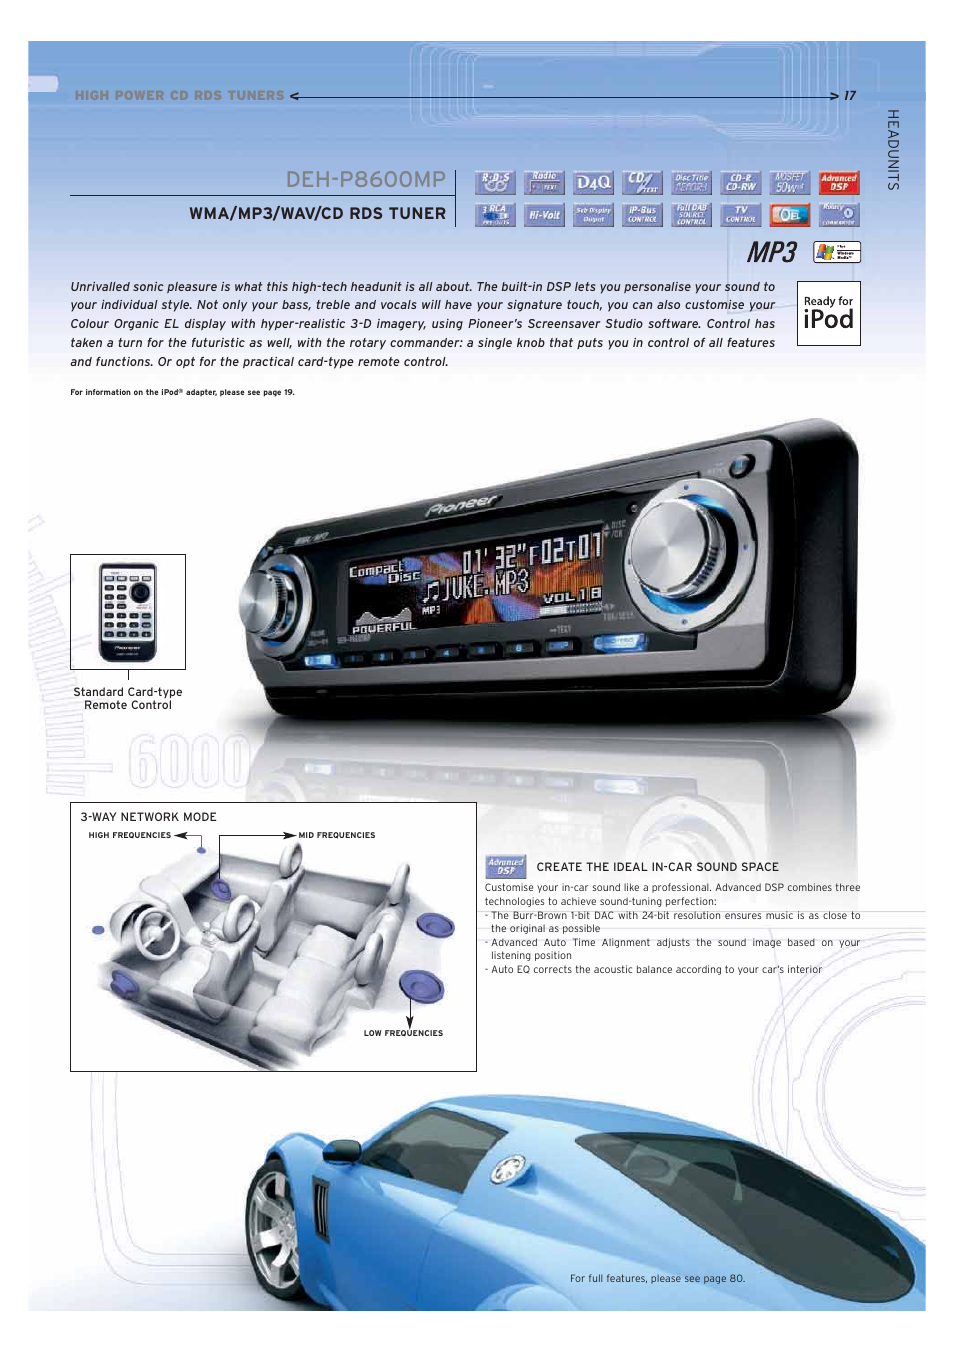 Deh-p8600mp, Wma/mp3/wav/cd rds tuner | Pioneer Car CD MP3 Player User  Manual | Page 17 / 39